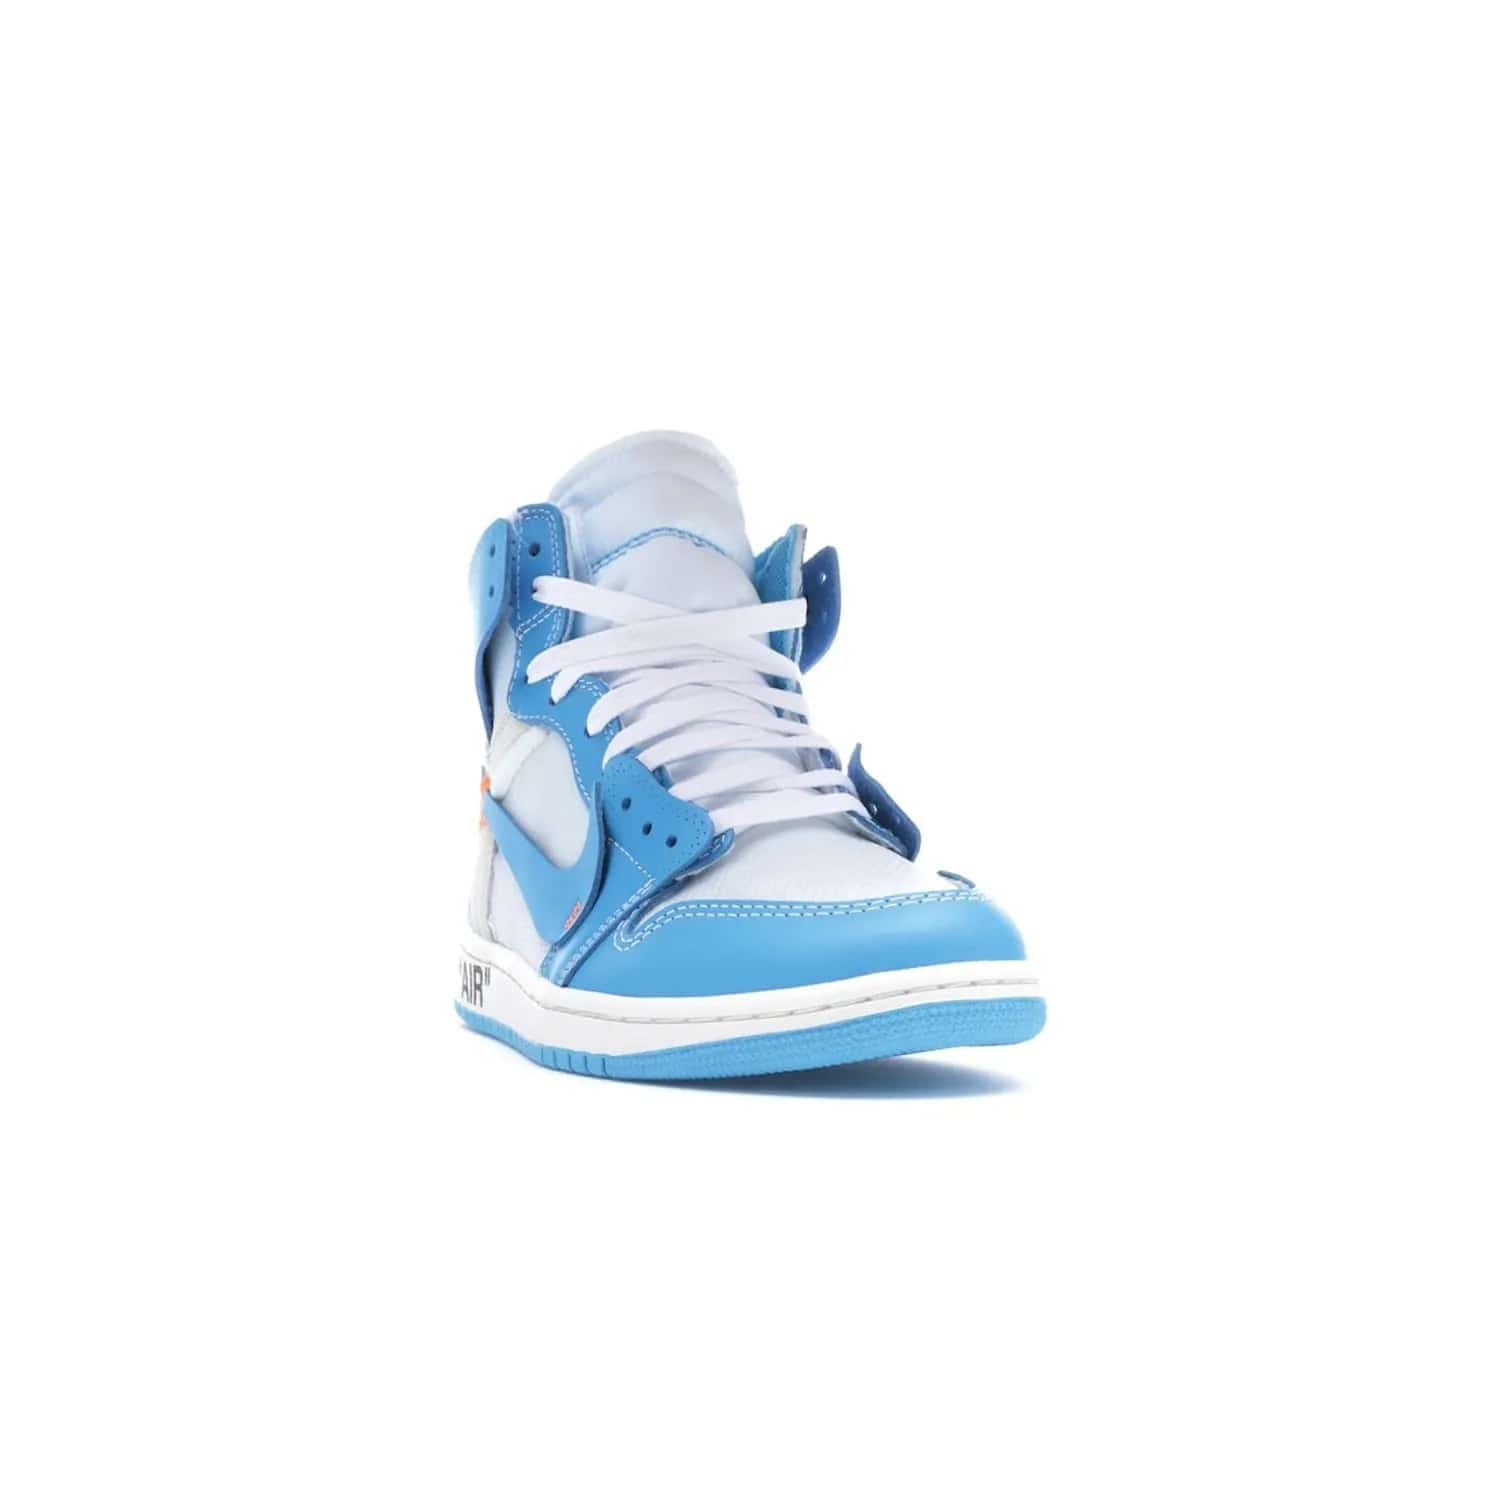 Jordan 1 Retro High Off-White University Blue - Image 8 - Only at www.BallersClubKickz.com - Classic Jordan 1 Retro High "Off-White UNC" sneakers meld style and comfort. Boasting deconstructed white and blue leather, Off-White detailing, and a white, dark powder blue and cone colorway, these sneakers are perfect for dressing up or down. Get the iconic Off-White Jordan 1's and upgrade your look.